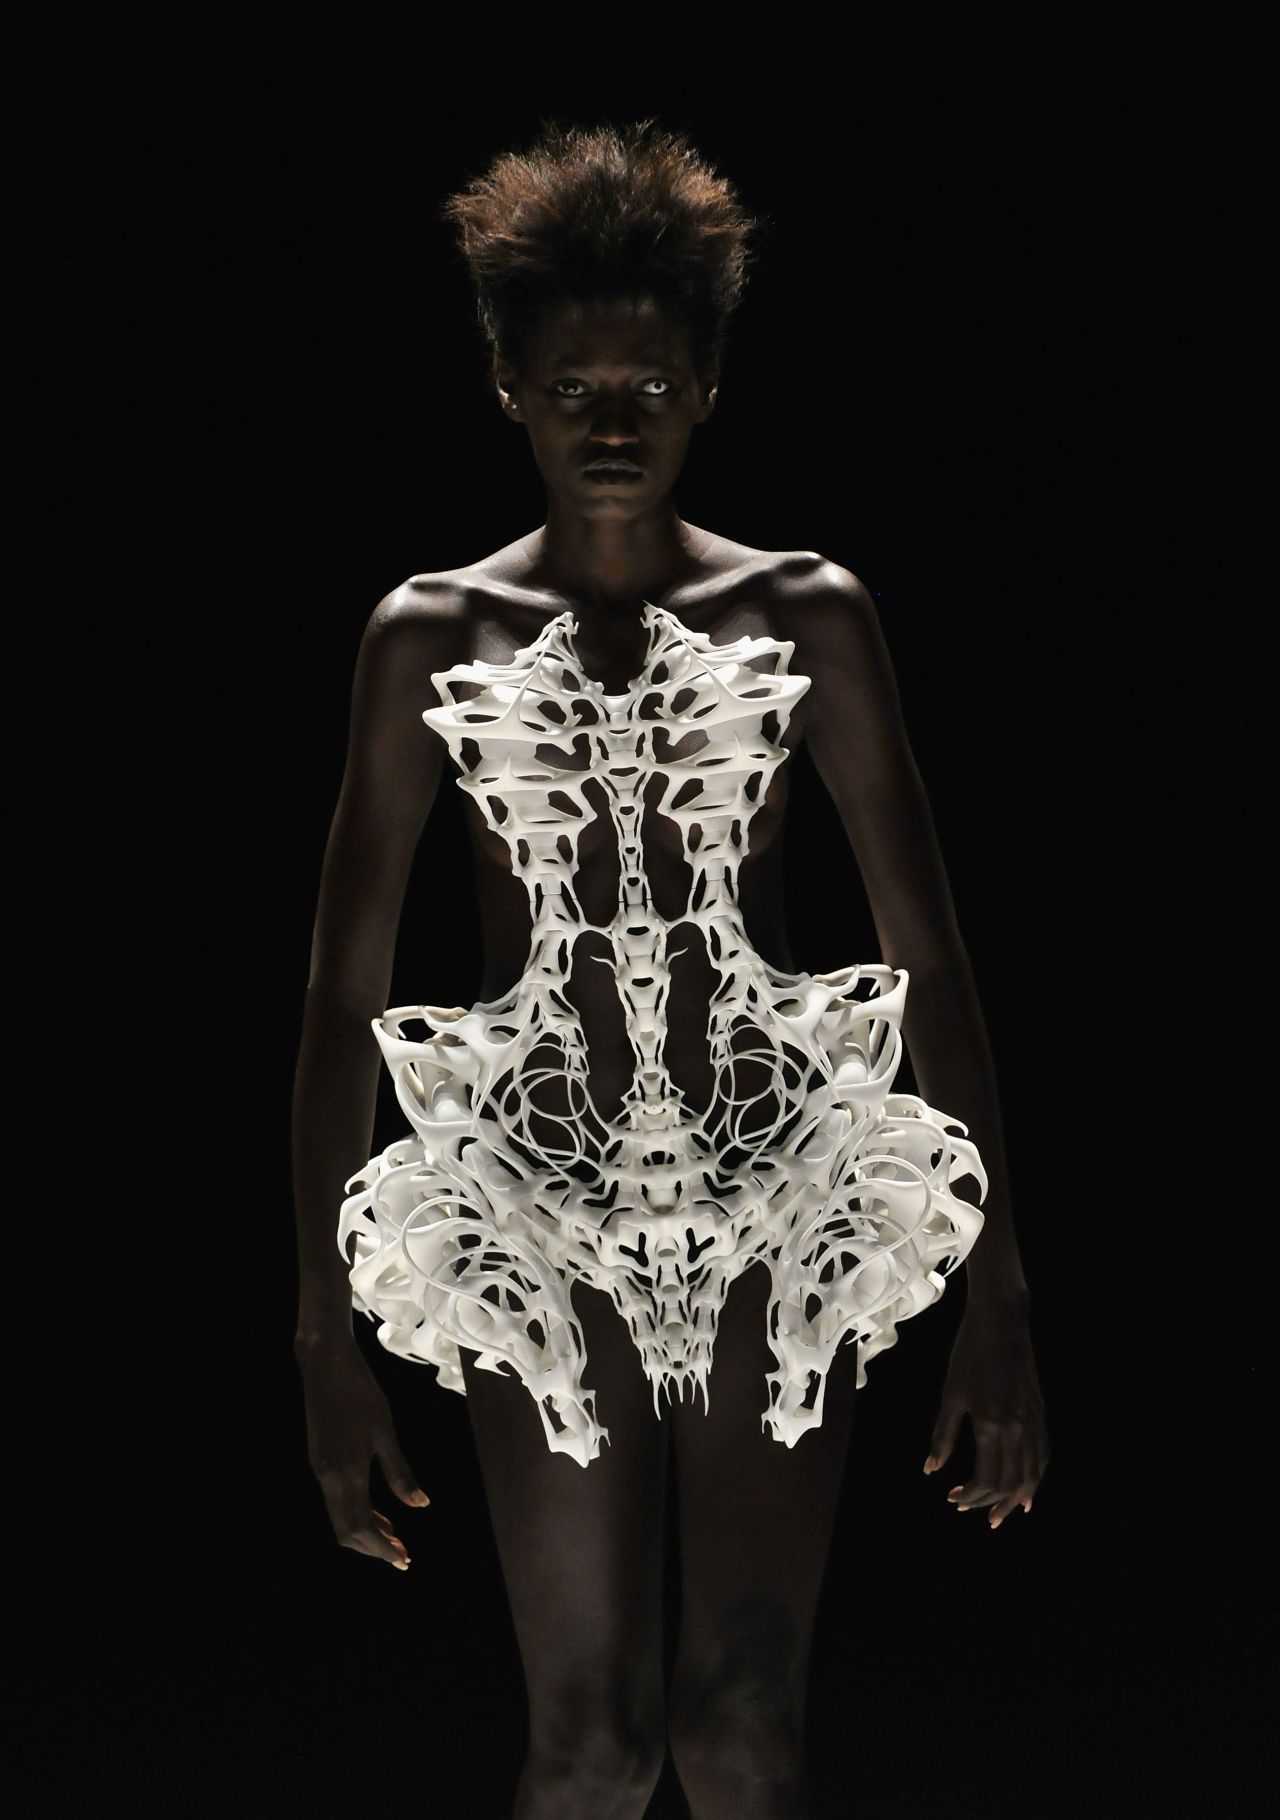 Dutch designer <a href="http://www.irisvanherpen.com/" target="_blank" target="_blank">Iris van Herpen</a> was one of the first fashion designers to use 3-D printing to create clothes and accessories. The technology allows for intricate designs, like this Van Herpen skeletal dress. 